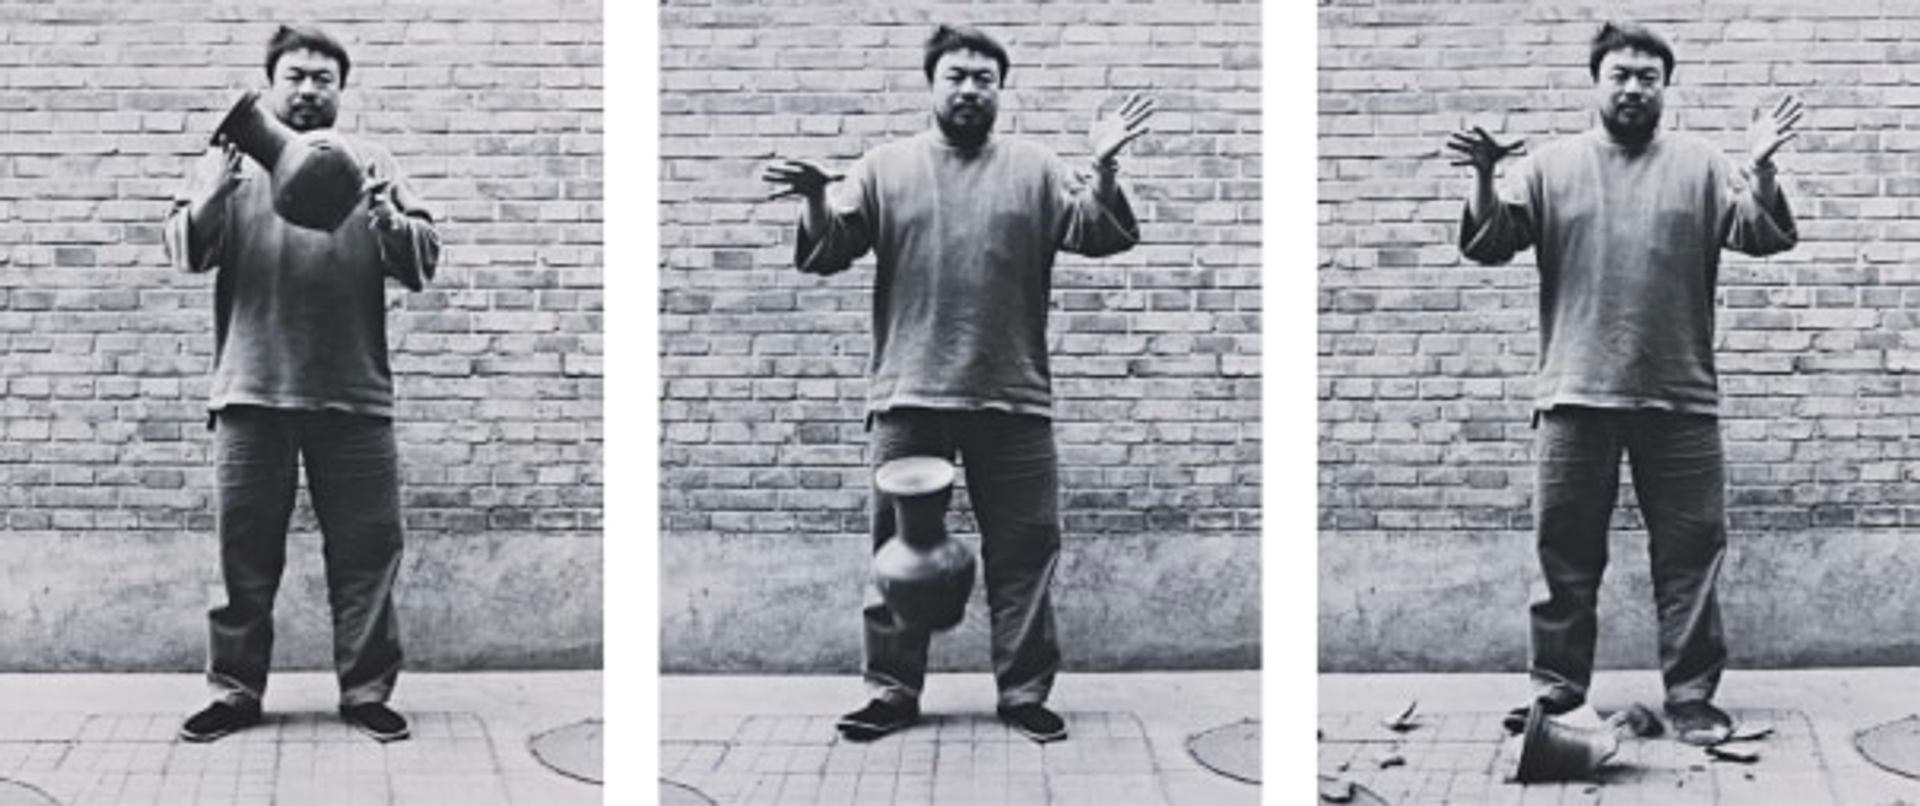 Three consecutive photographs of artist Ai Weiwei dropping an urn onto the floor